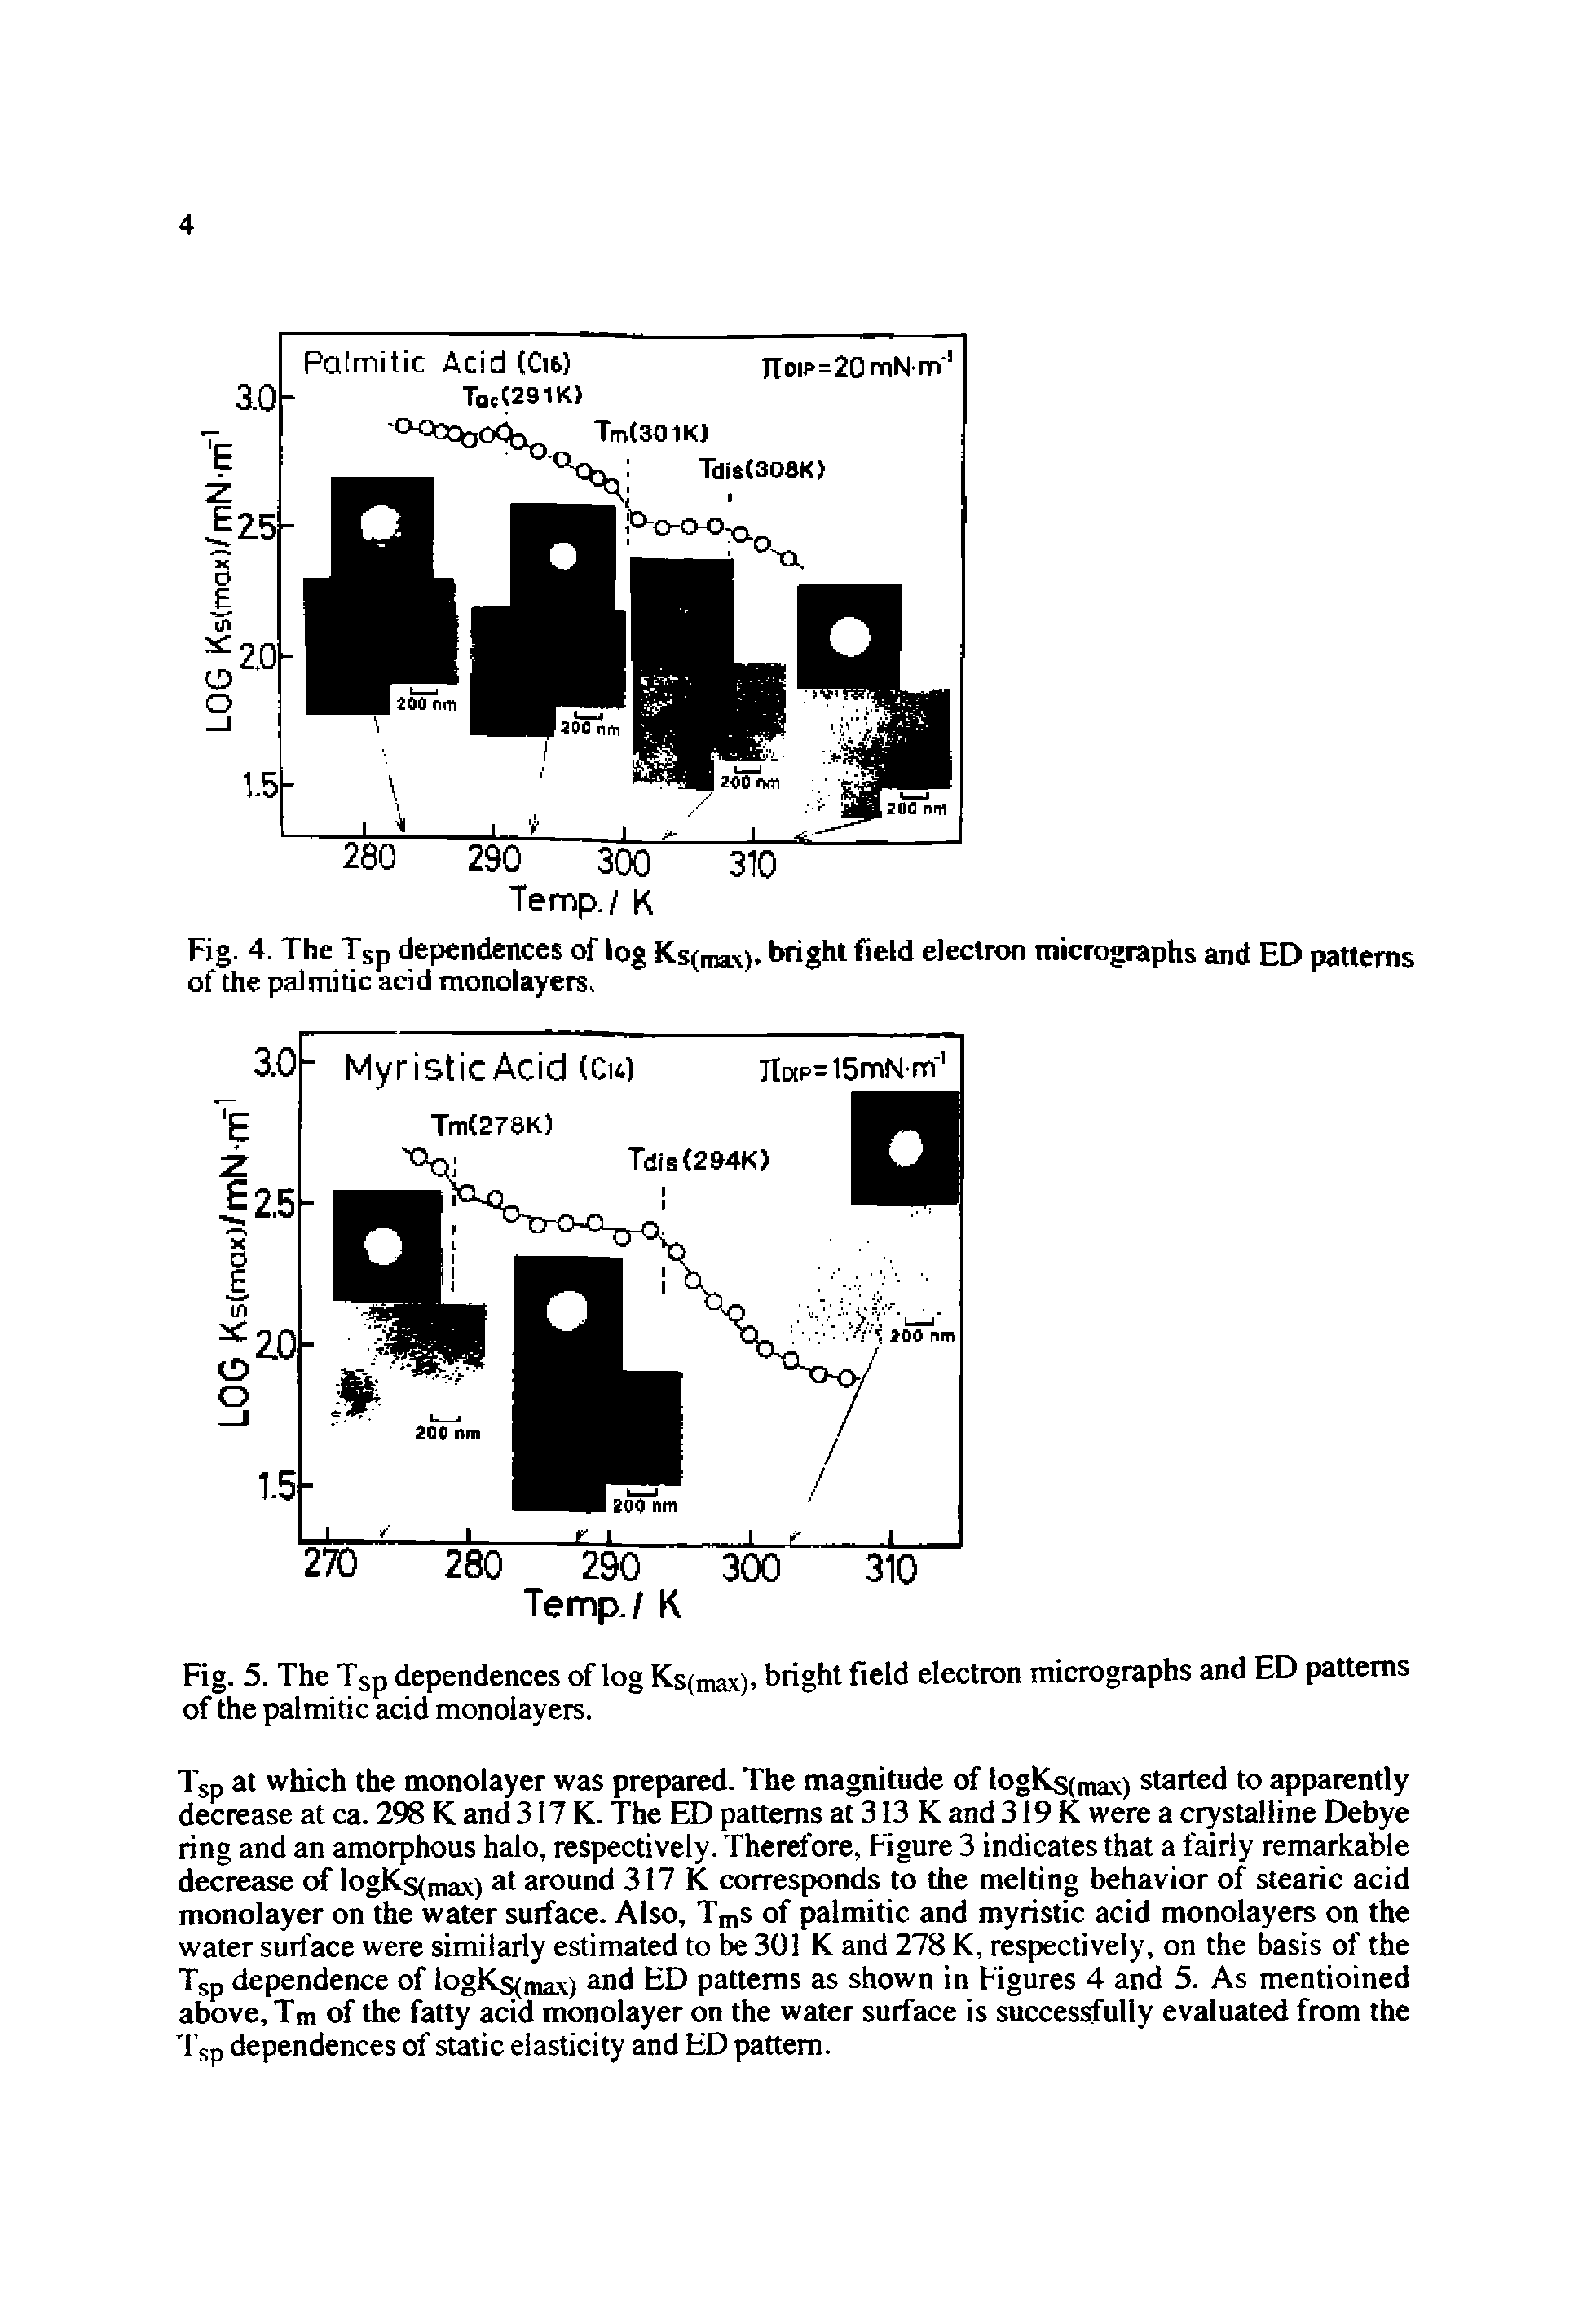 Fig. 5. The Tsp dependences of log Ks(max). bright field electron micrographs and ED patterns of the palmitic acid monolayers.